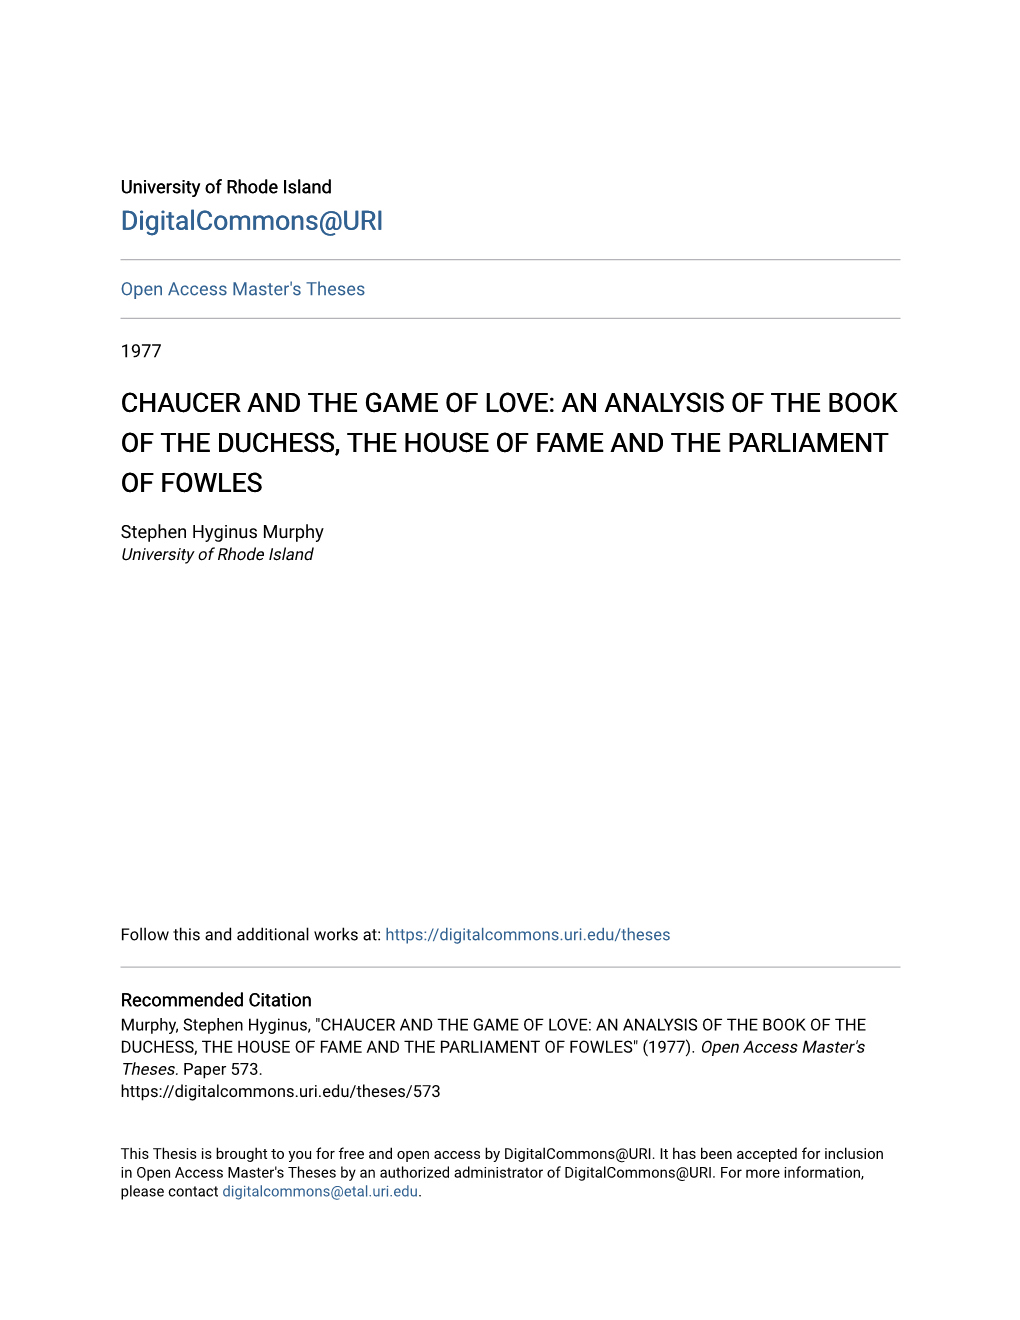 Chaucer and the Game of Love: an Analysis of the Book of the Duchess, the House of Fame and the Parliament of Fowles